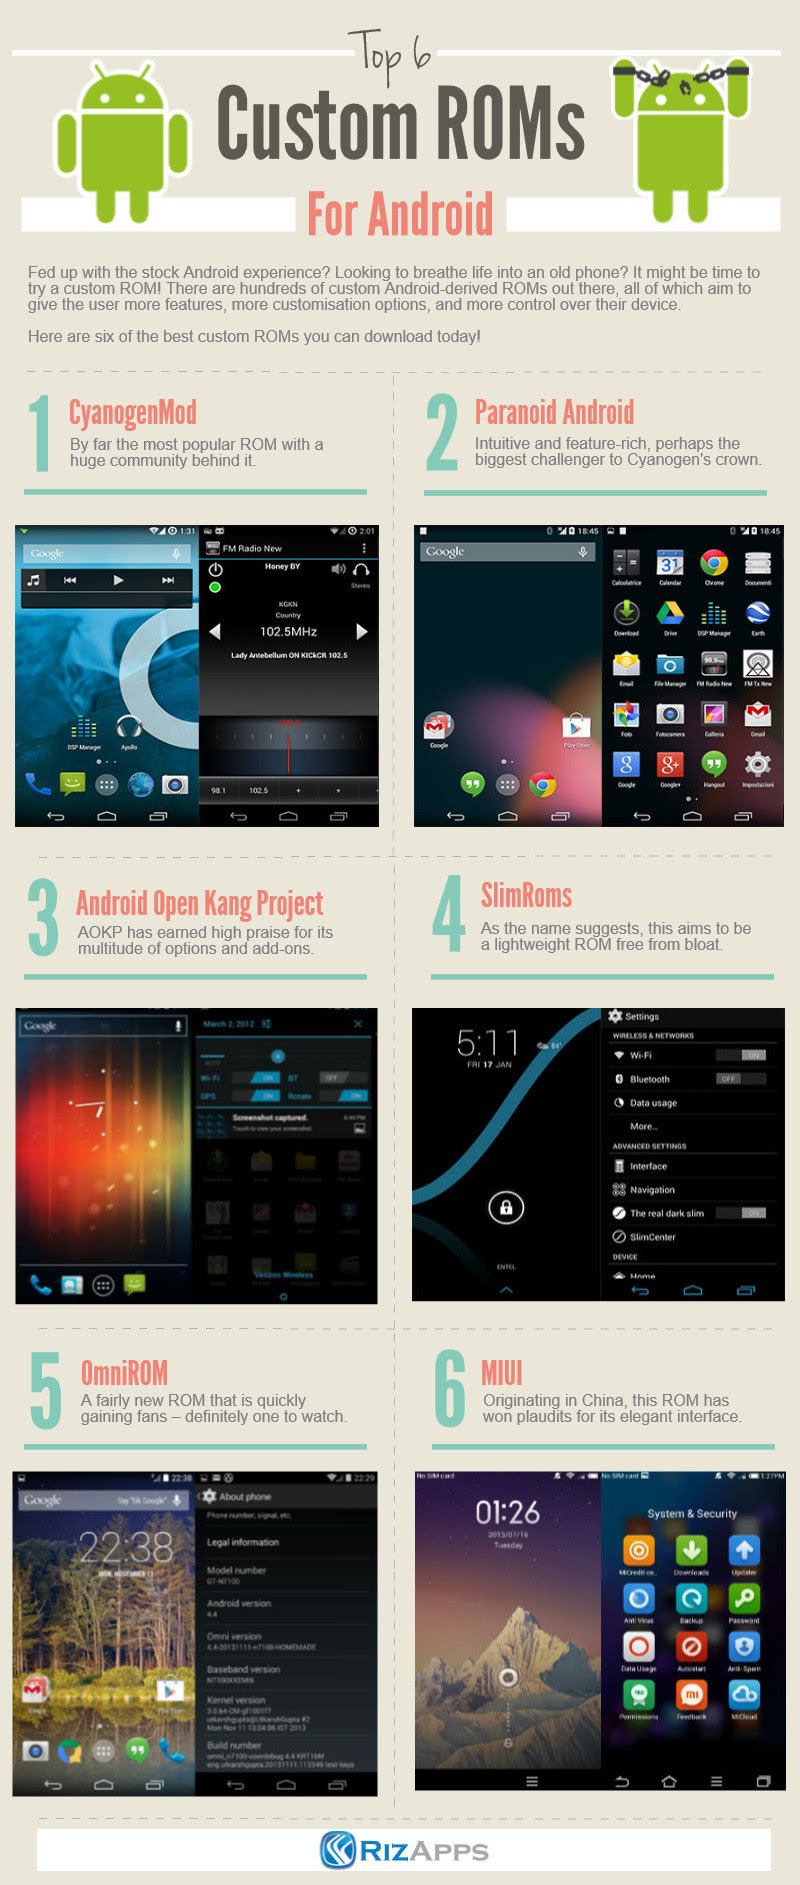 Top 6 Custom ROMs for Android #infographic - Visualistan